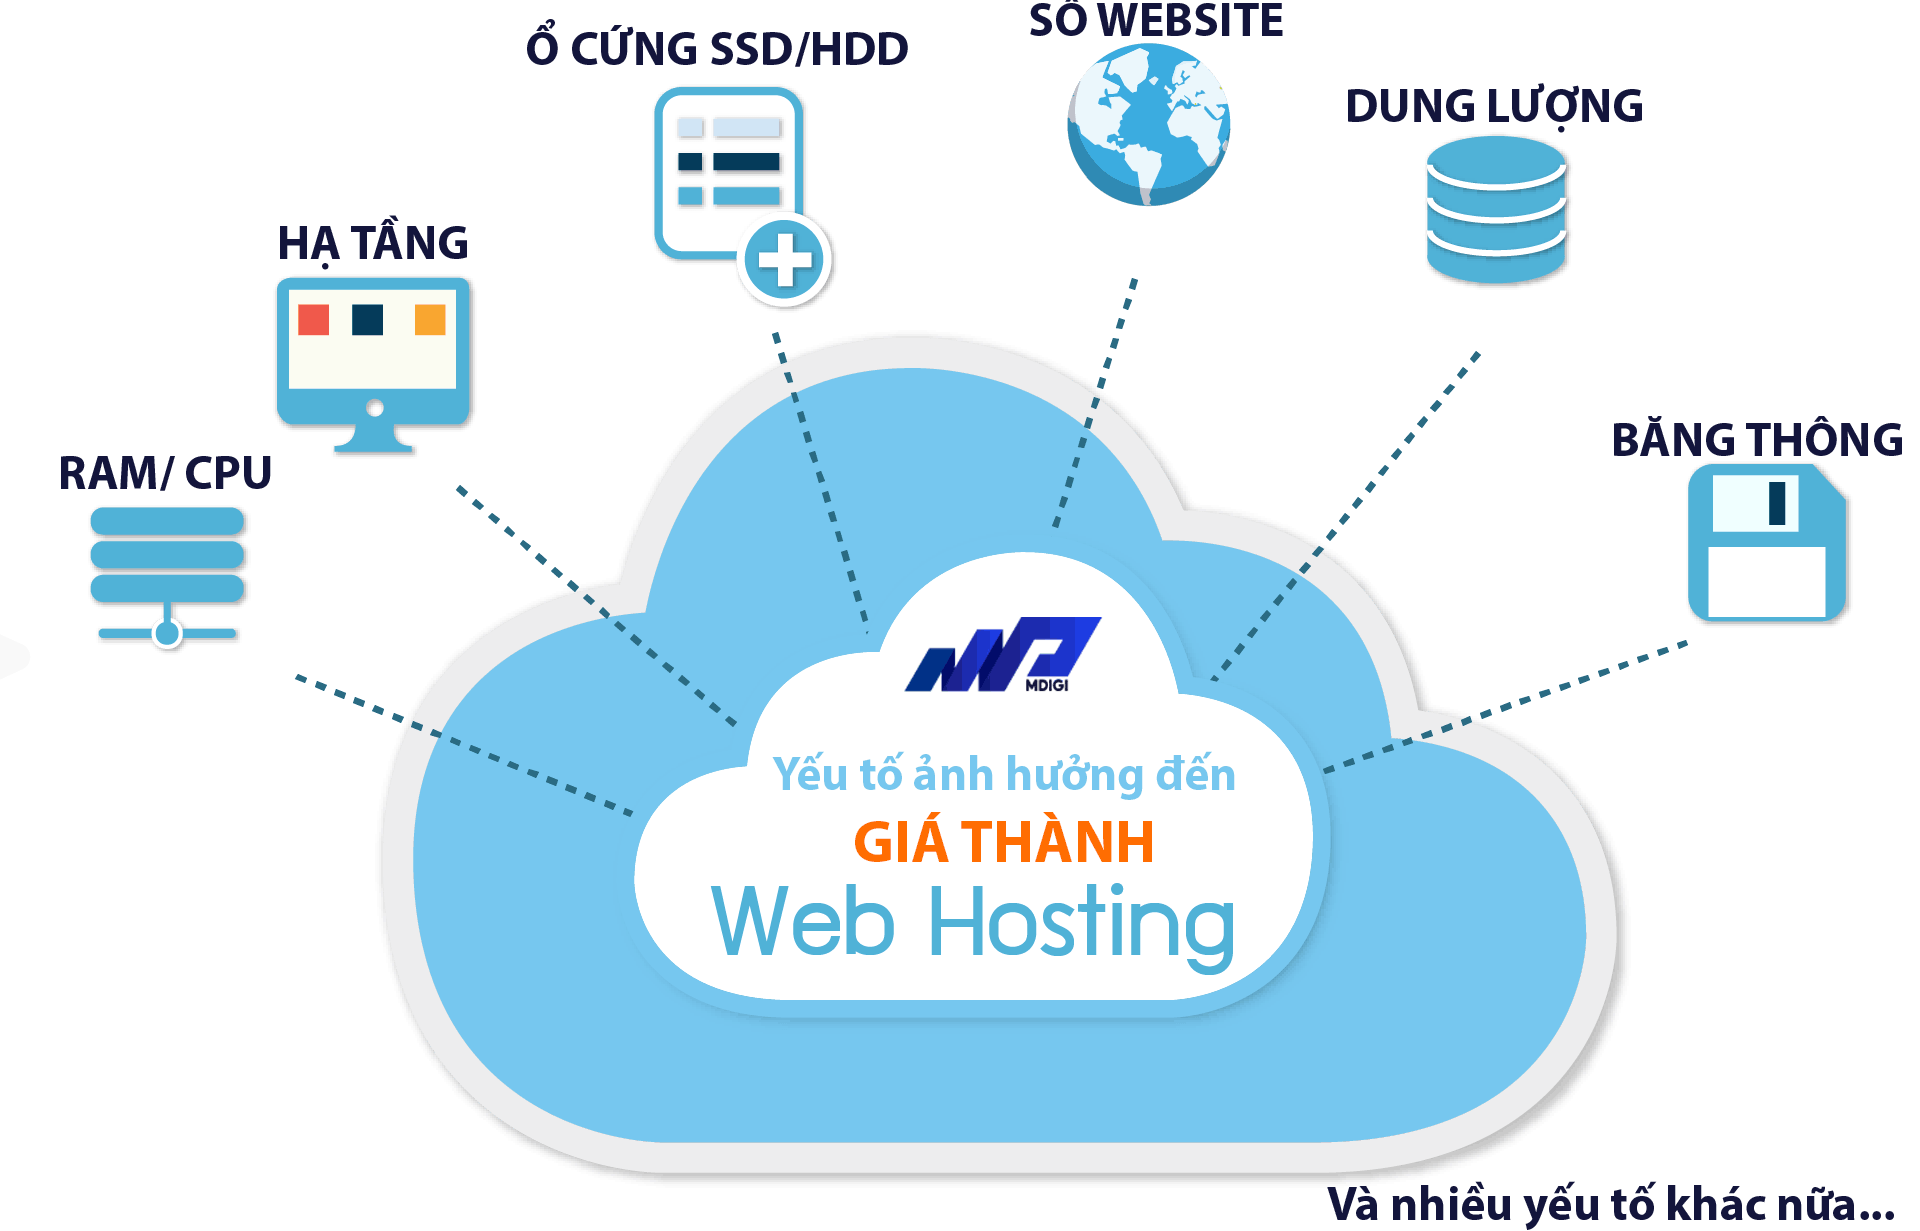 cac-yeu-to-anh-huong-den-gia-thanh-hosting